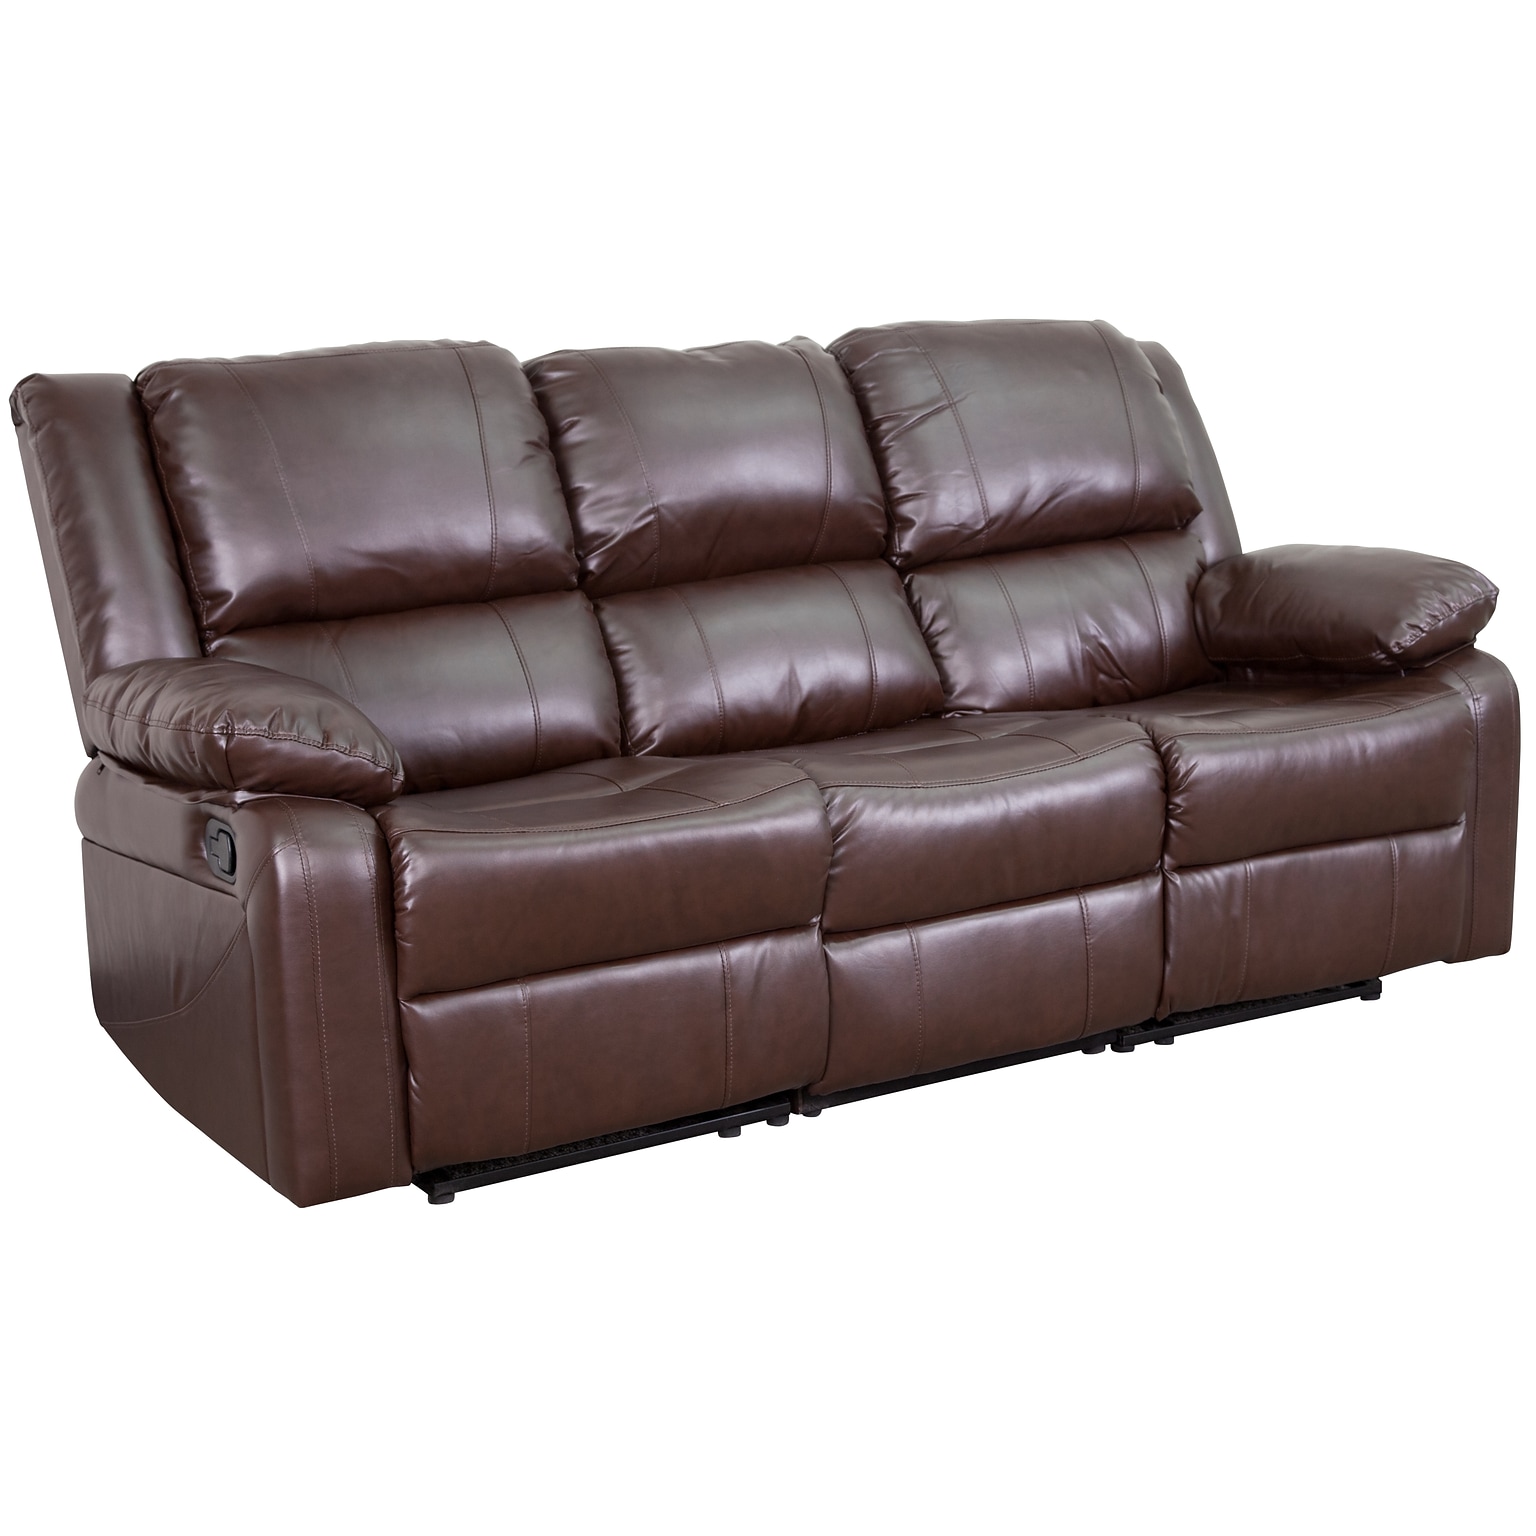 Flash Furniture Harmony Series 77 LeatherSoft Sofa with Two Built-In Recliners, Brown (BT70597SOFBN)